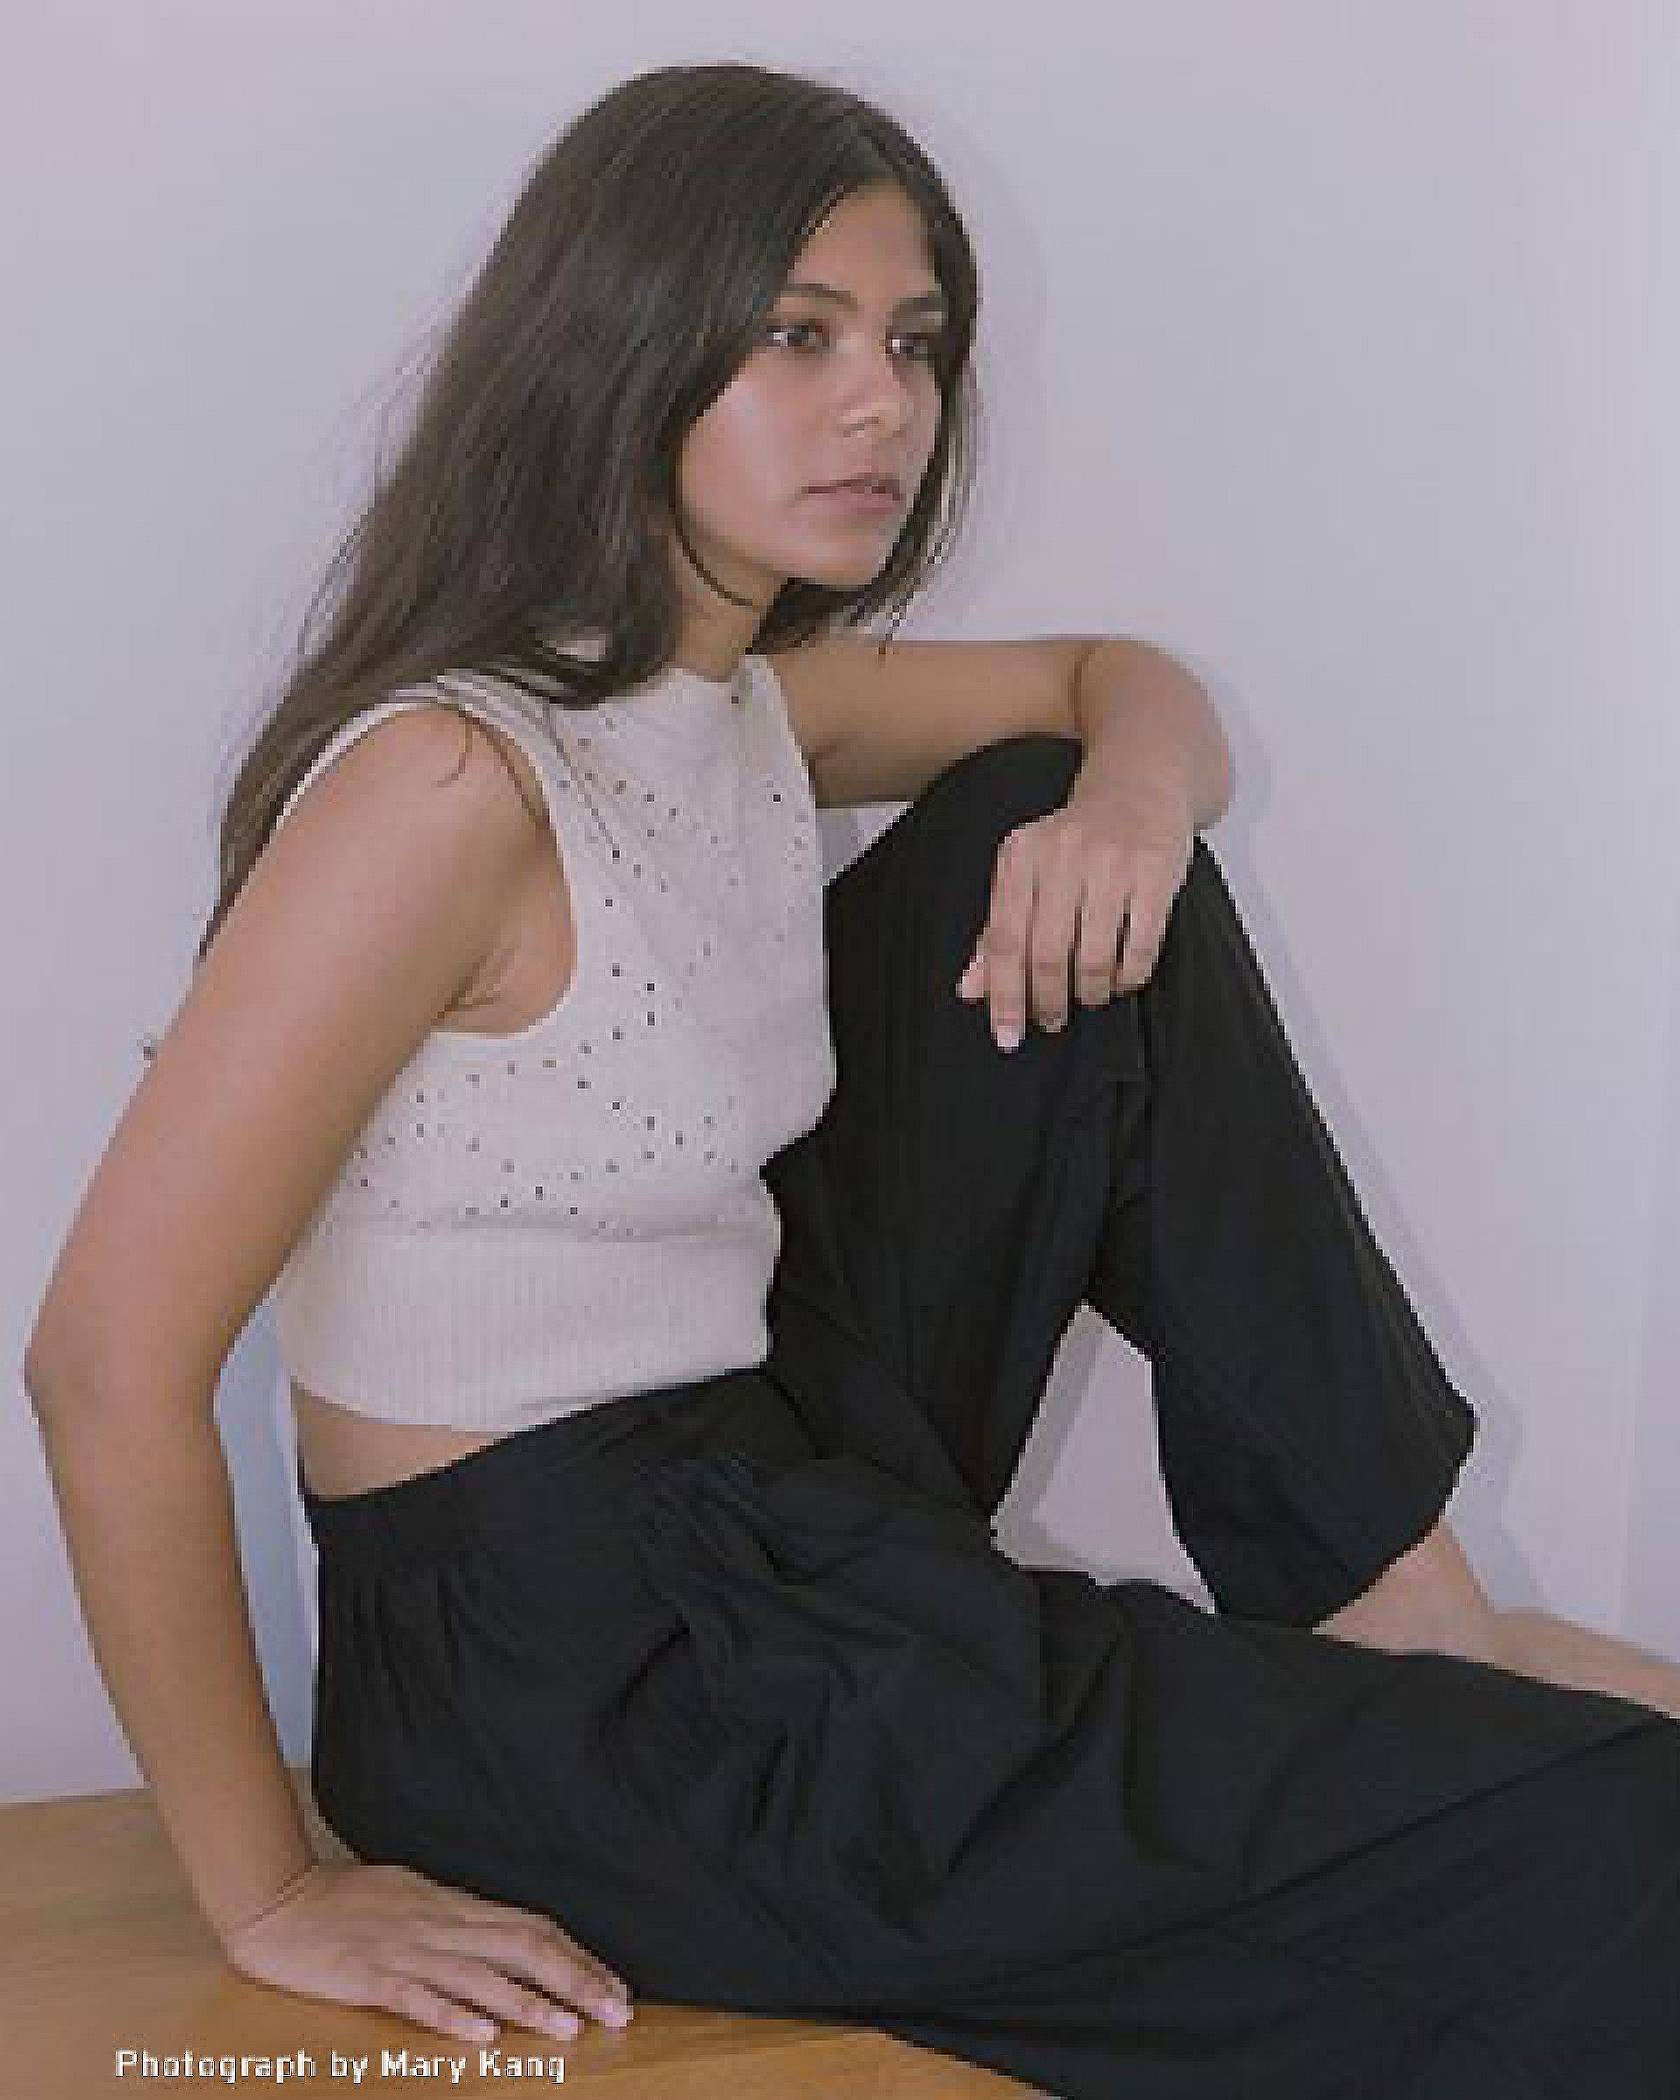 Portrait of Tasnim Ahmed wearing a white eyelet lace top and black pants.